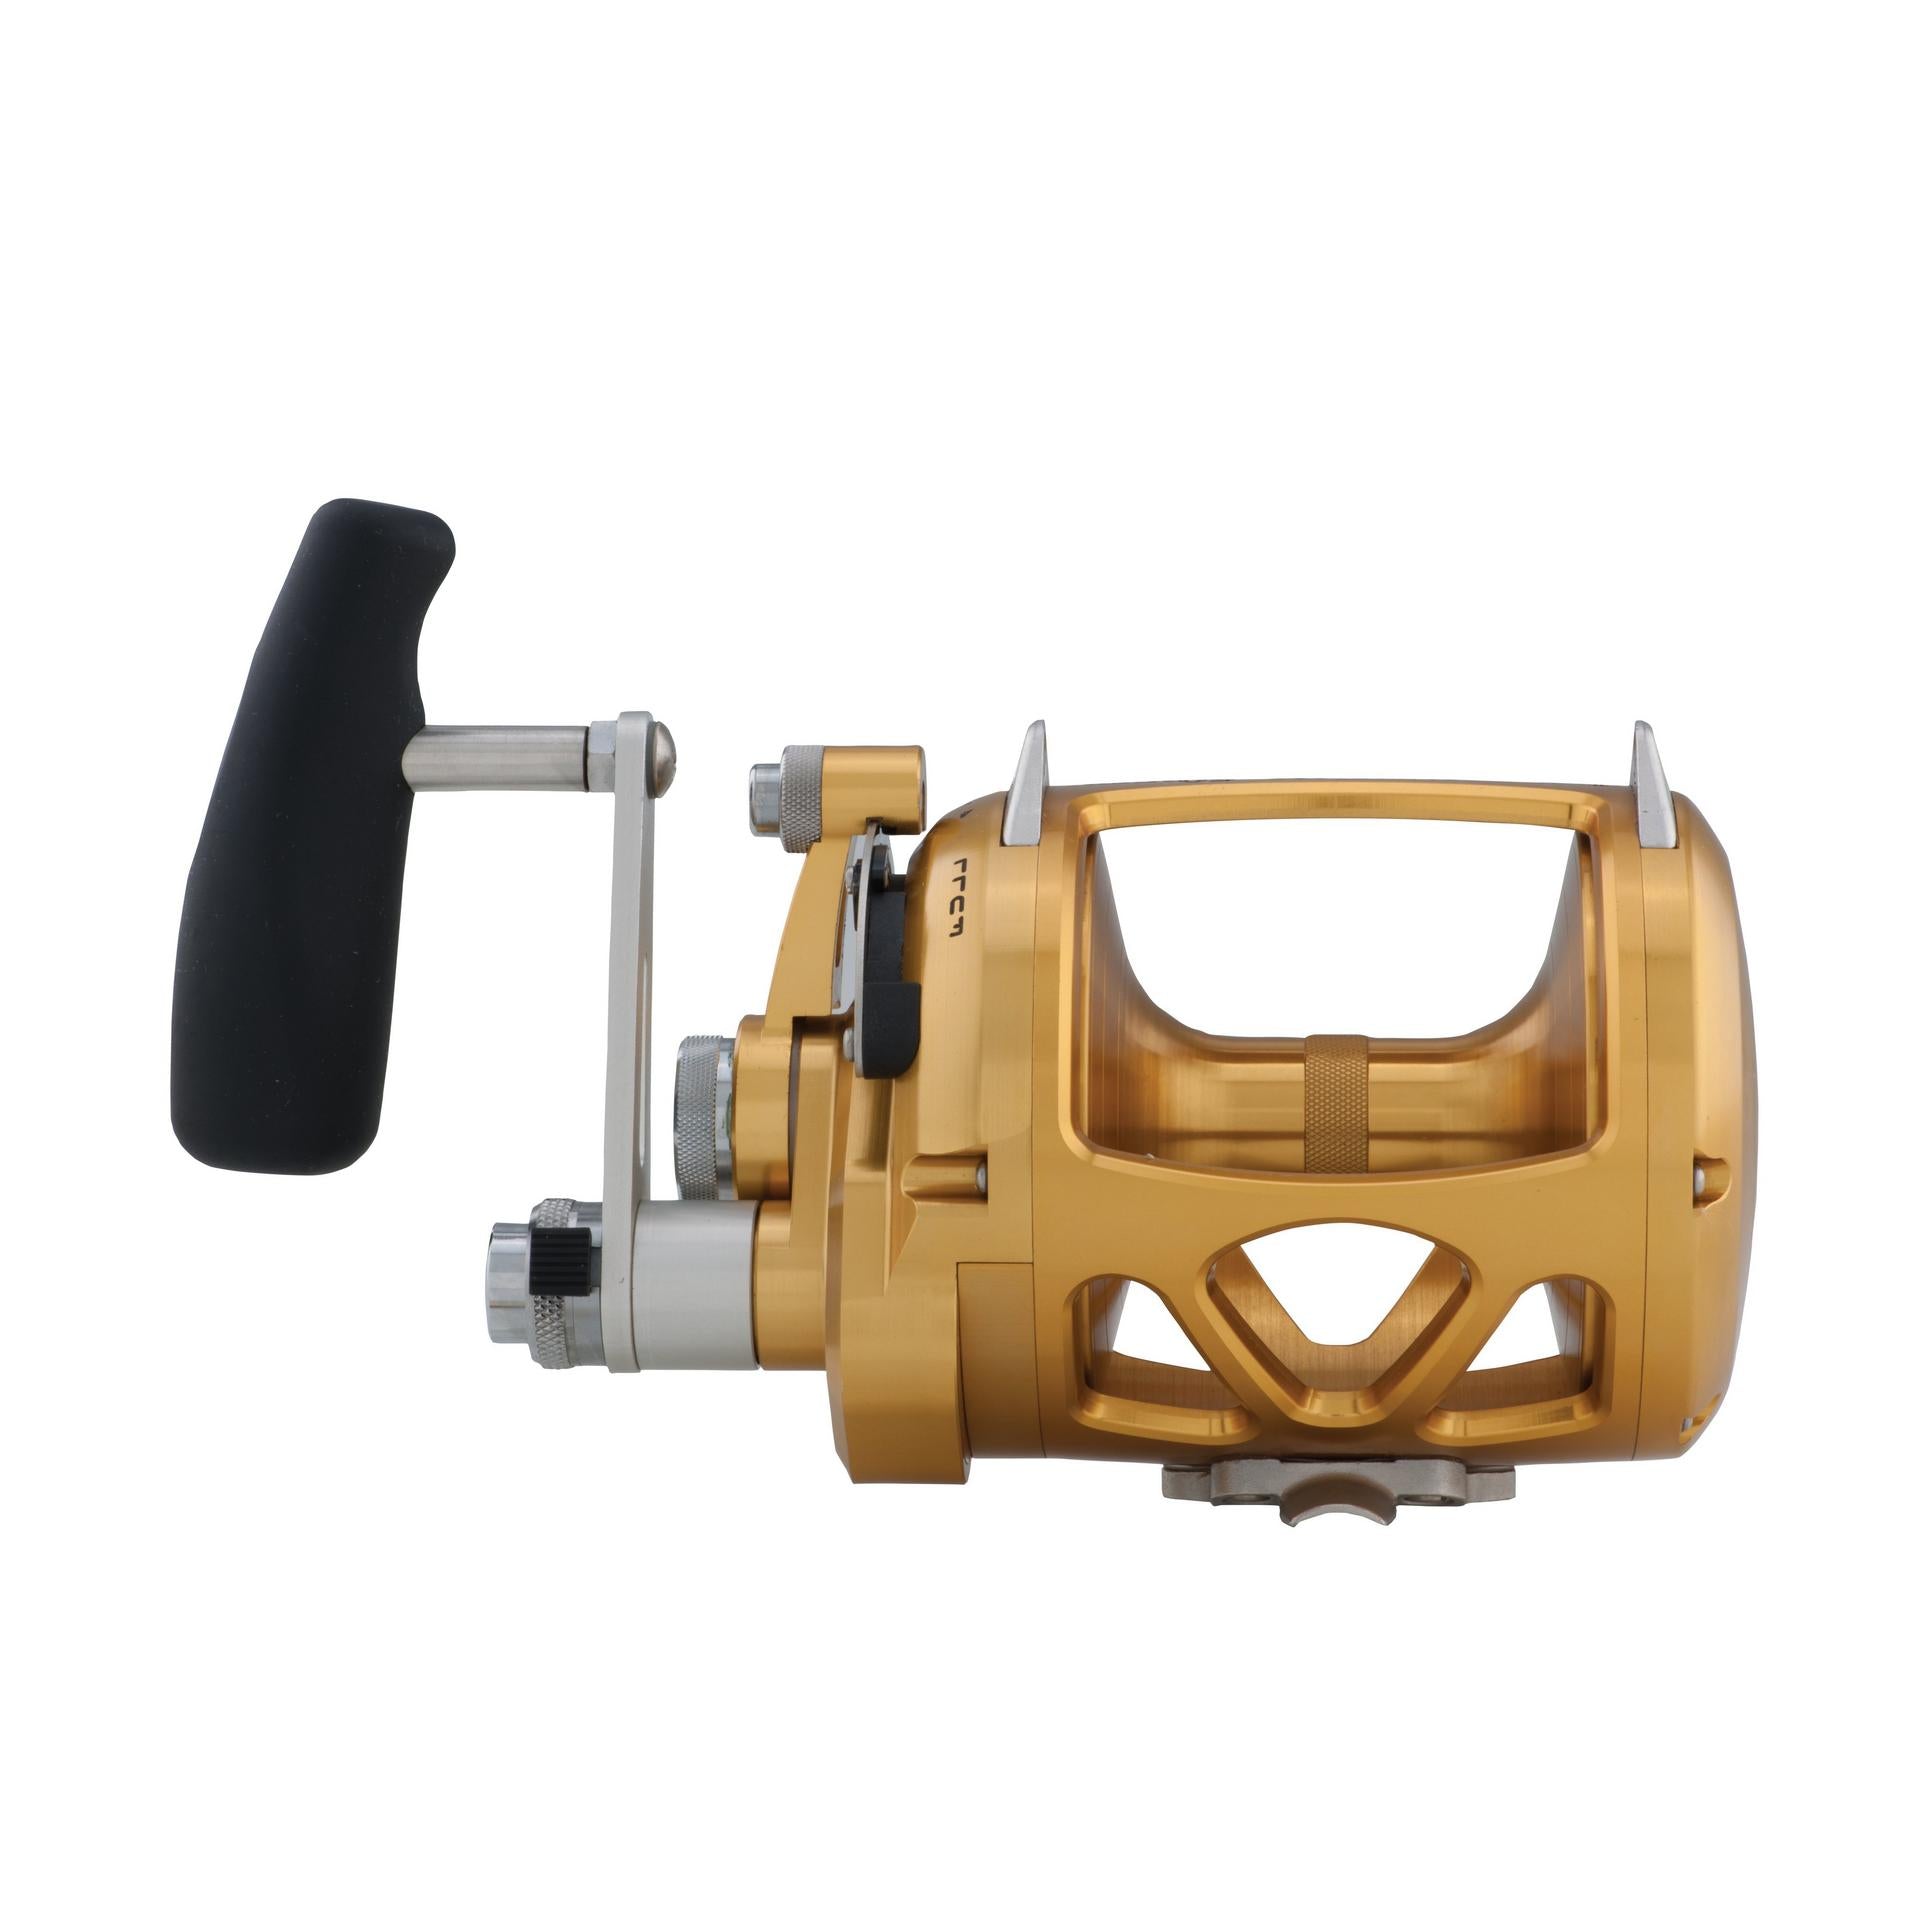 penn International 30 and 50 for sale-price lowered! - Reel Talk - ORCA